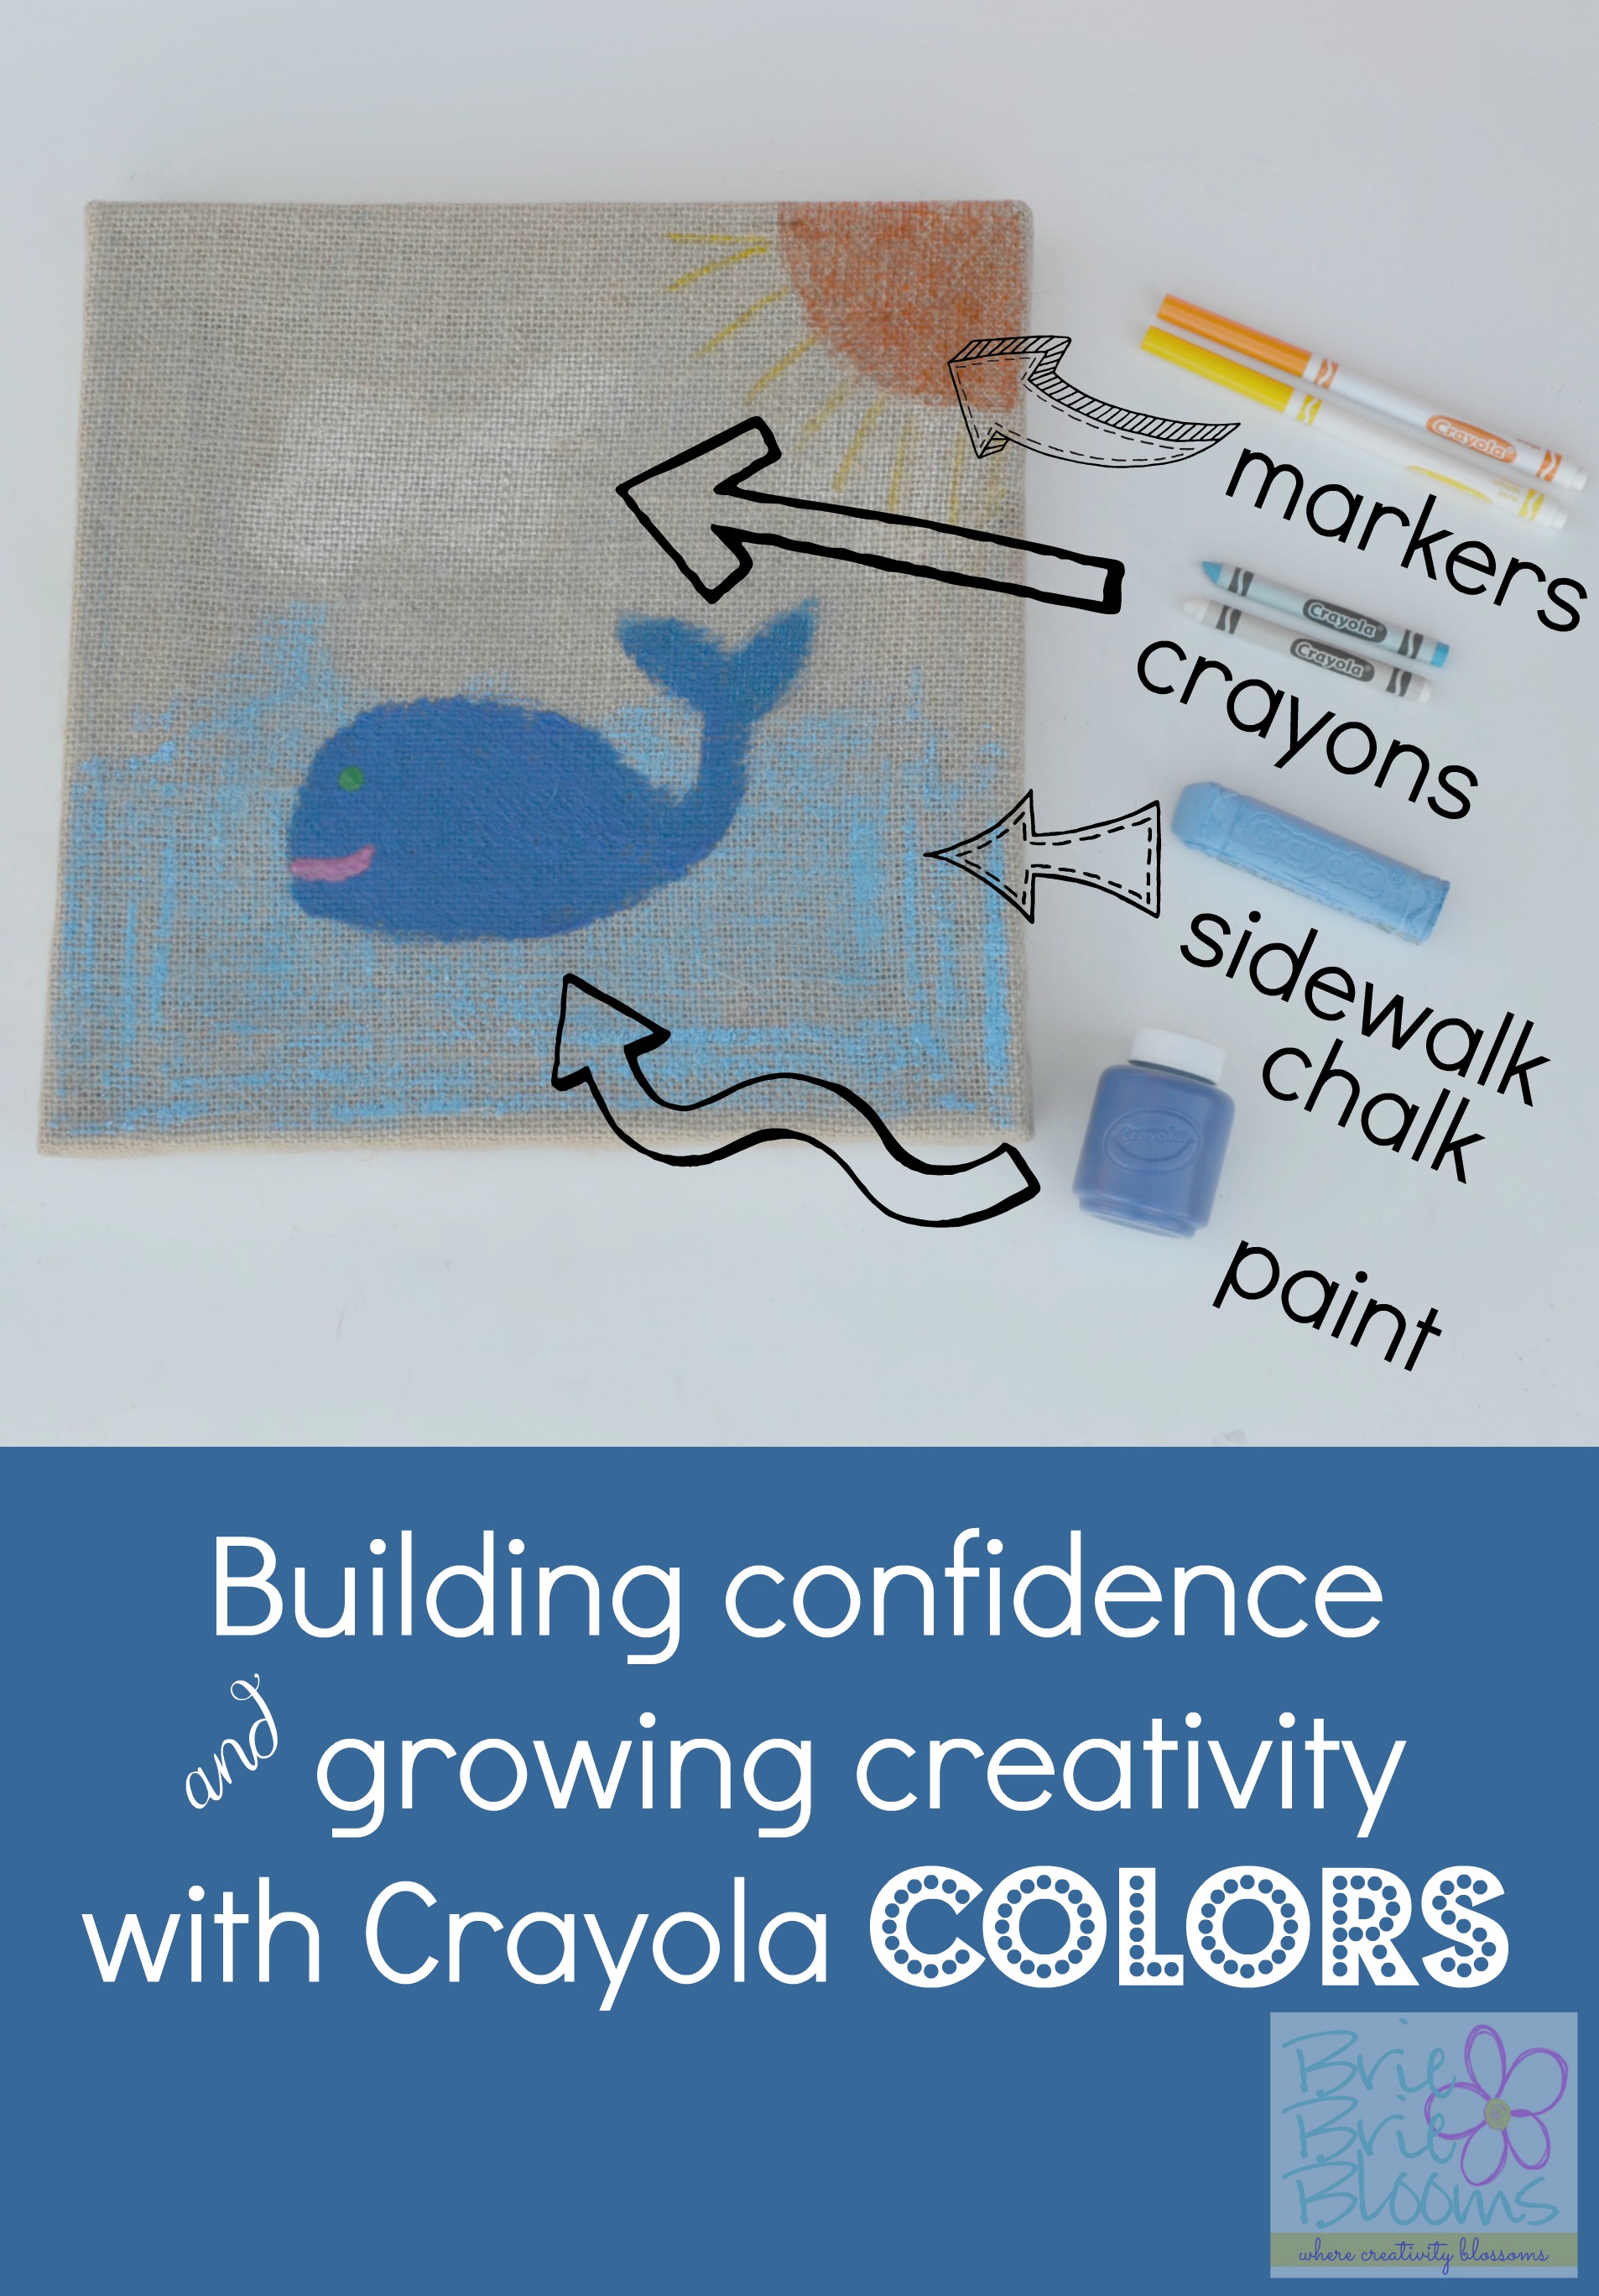 building-confidence-and-growing-creativity-with-Crayola-colors